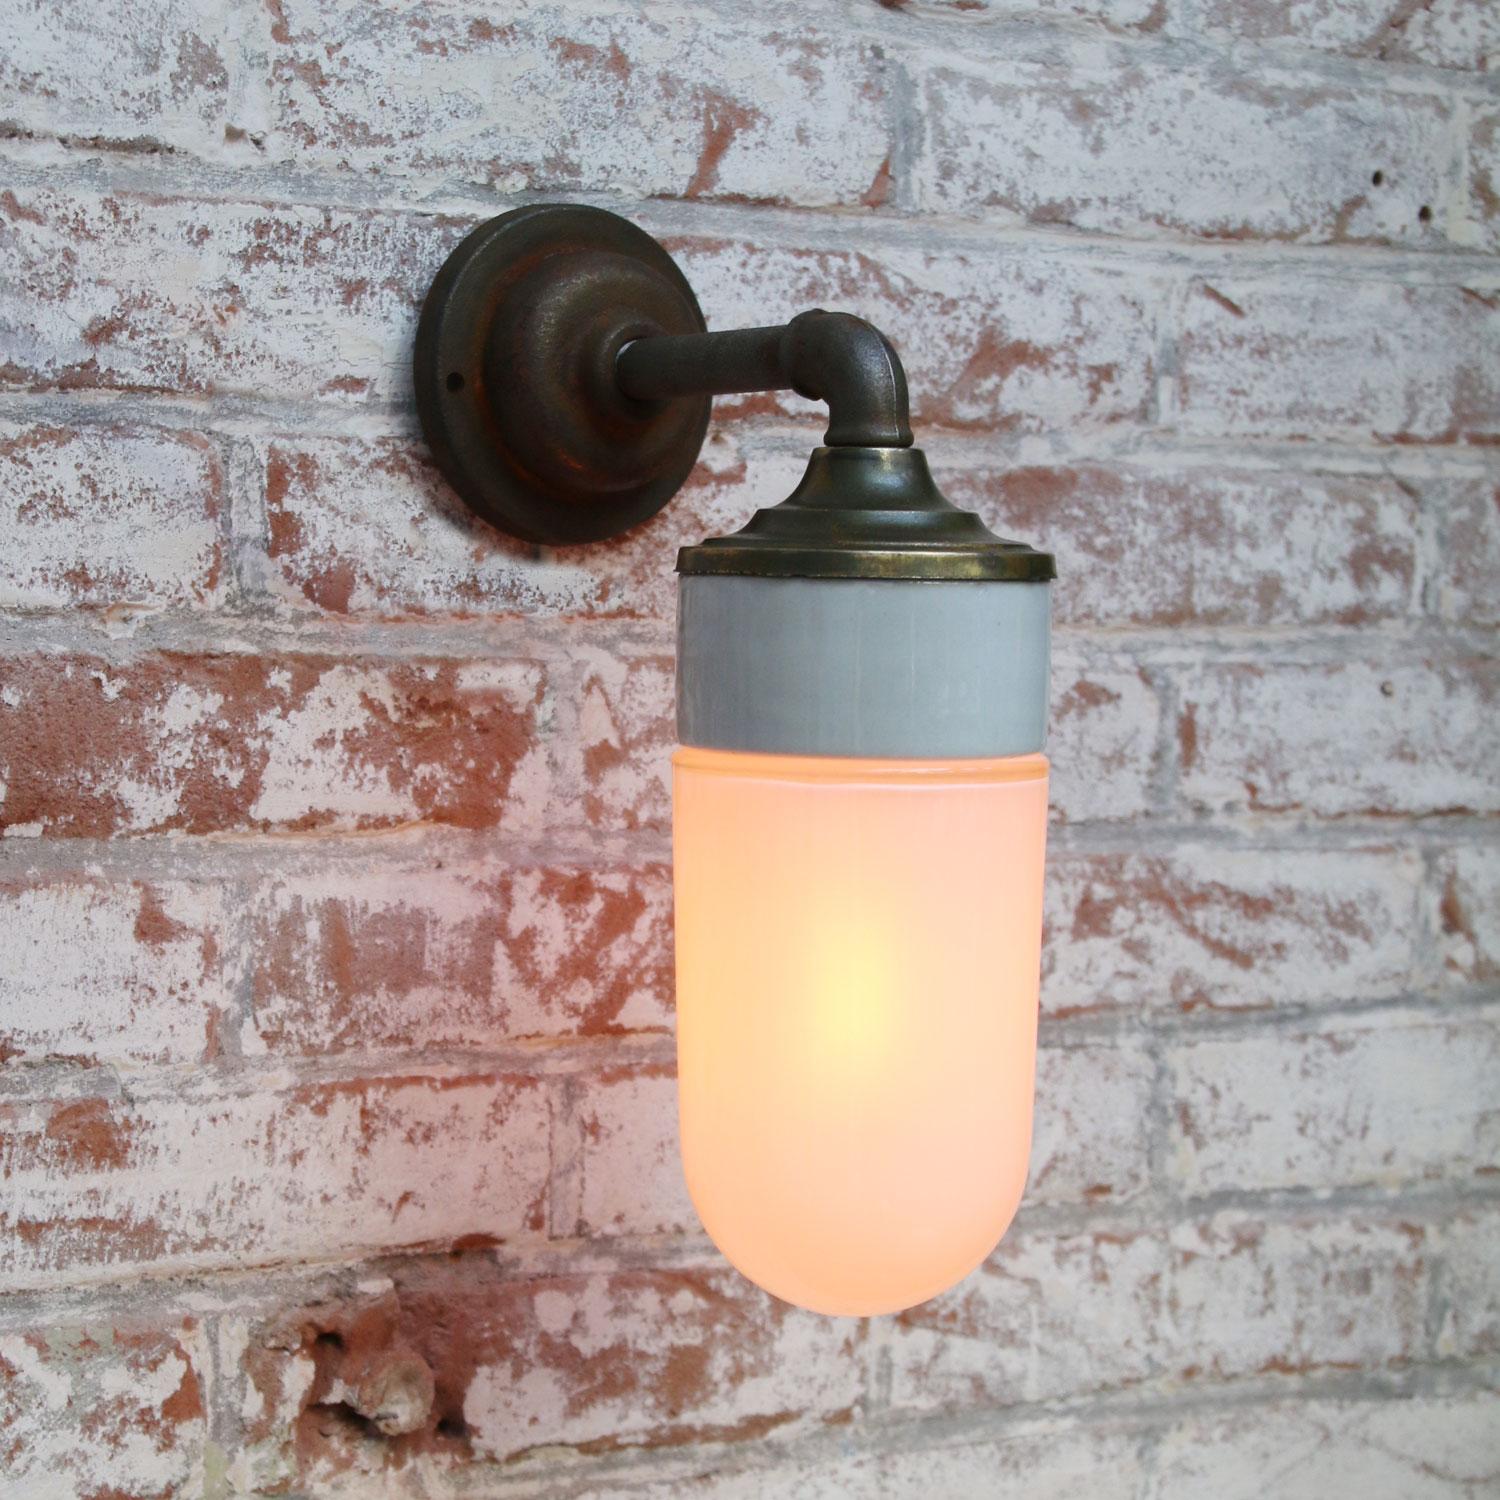 Porcelain Industrial wall lamp.
White porcelain, brass and cast iron
Opaline milk glass.
2 conductors, no ground.

Diameter wall mount 10.5 cm / 4”

for use inside only

Weight: 2.10 kg / 4.6 lb

Priced per individual item. All lamps have been made